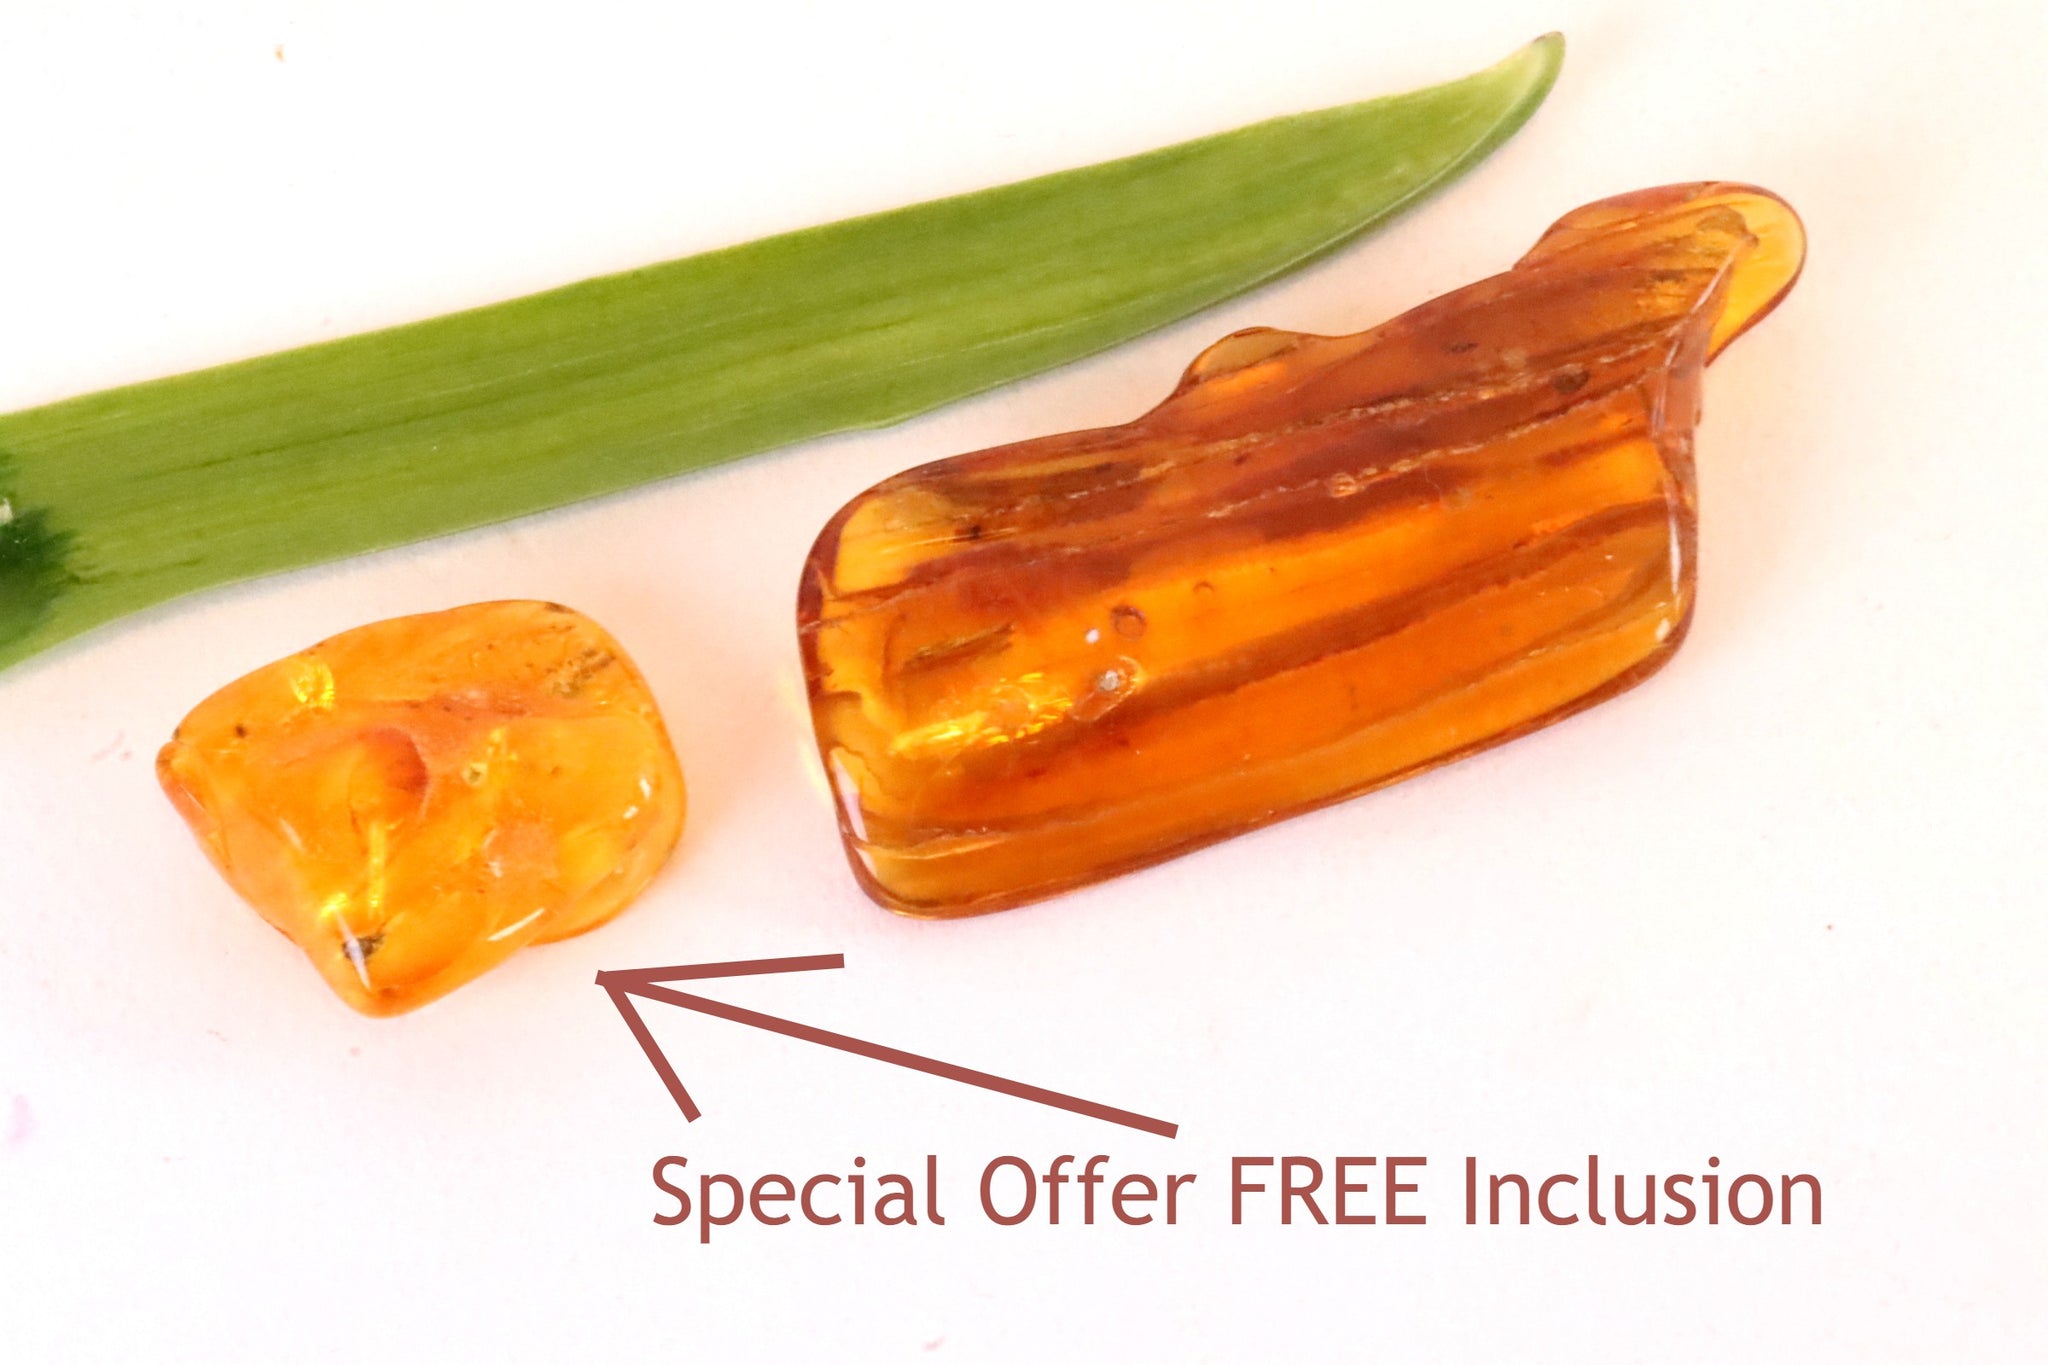 Baltic Amber Museum Collector's gem With Insects Inclusion + FREE Extra Inclusion